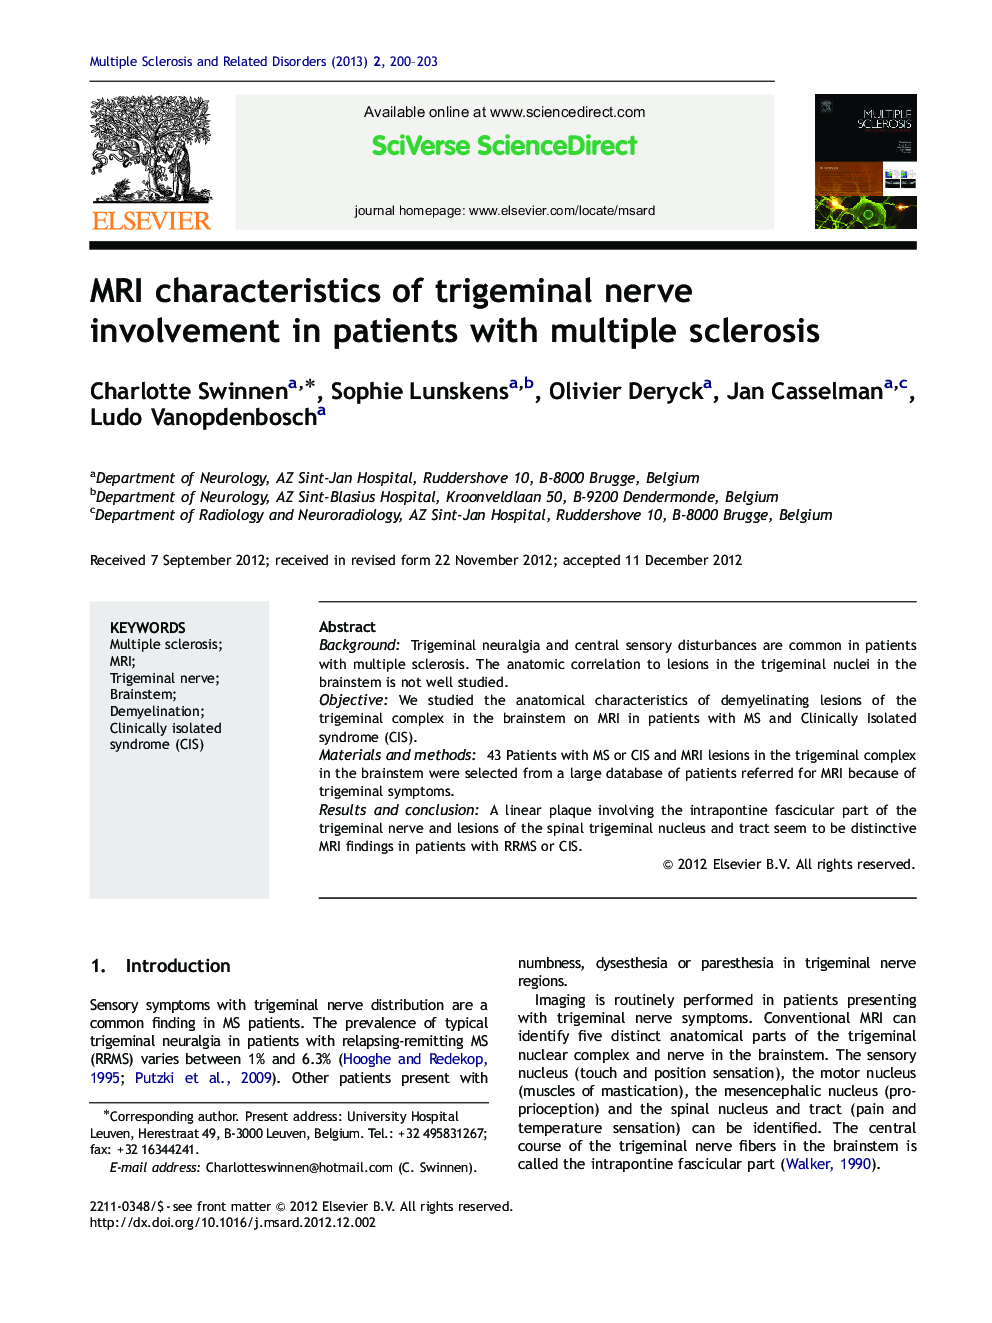 MRI characteristics of trigeminal nerve involvement in patients with multiple sclerosis